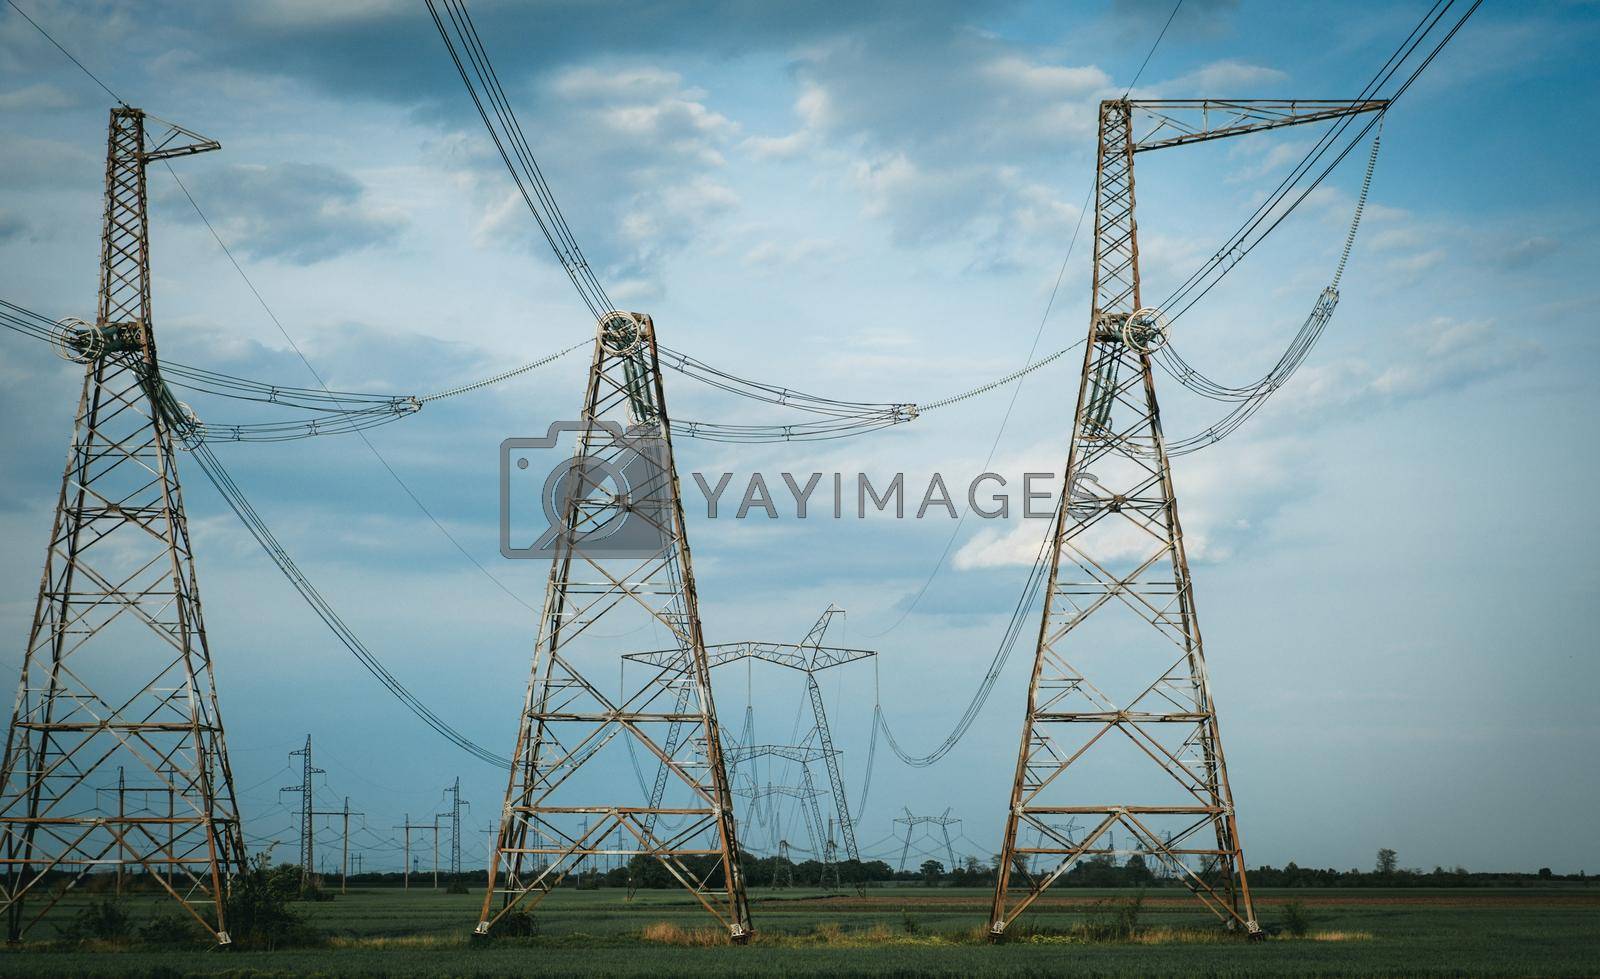 Royalty free image of high voltage power line. high voltage lines. electricity transmission. by igor010